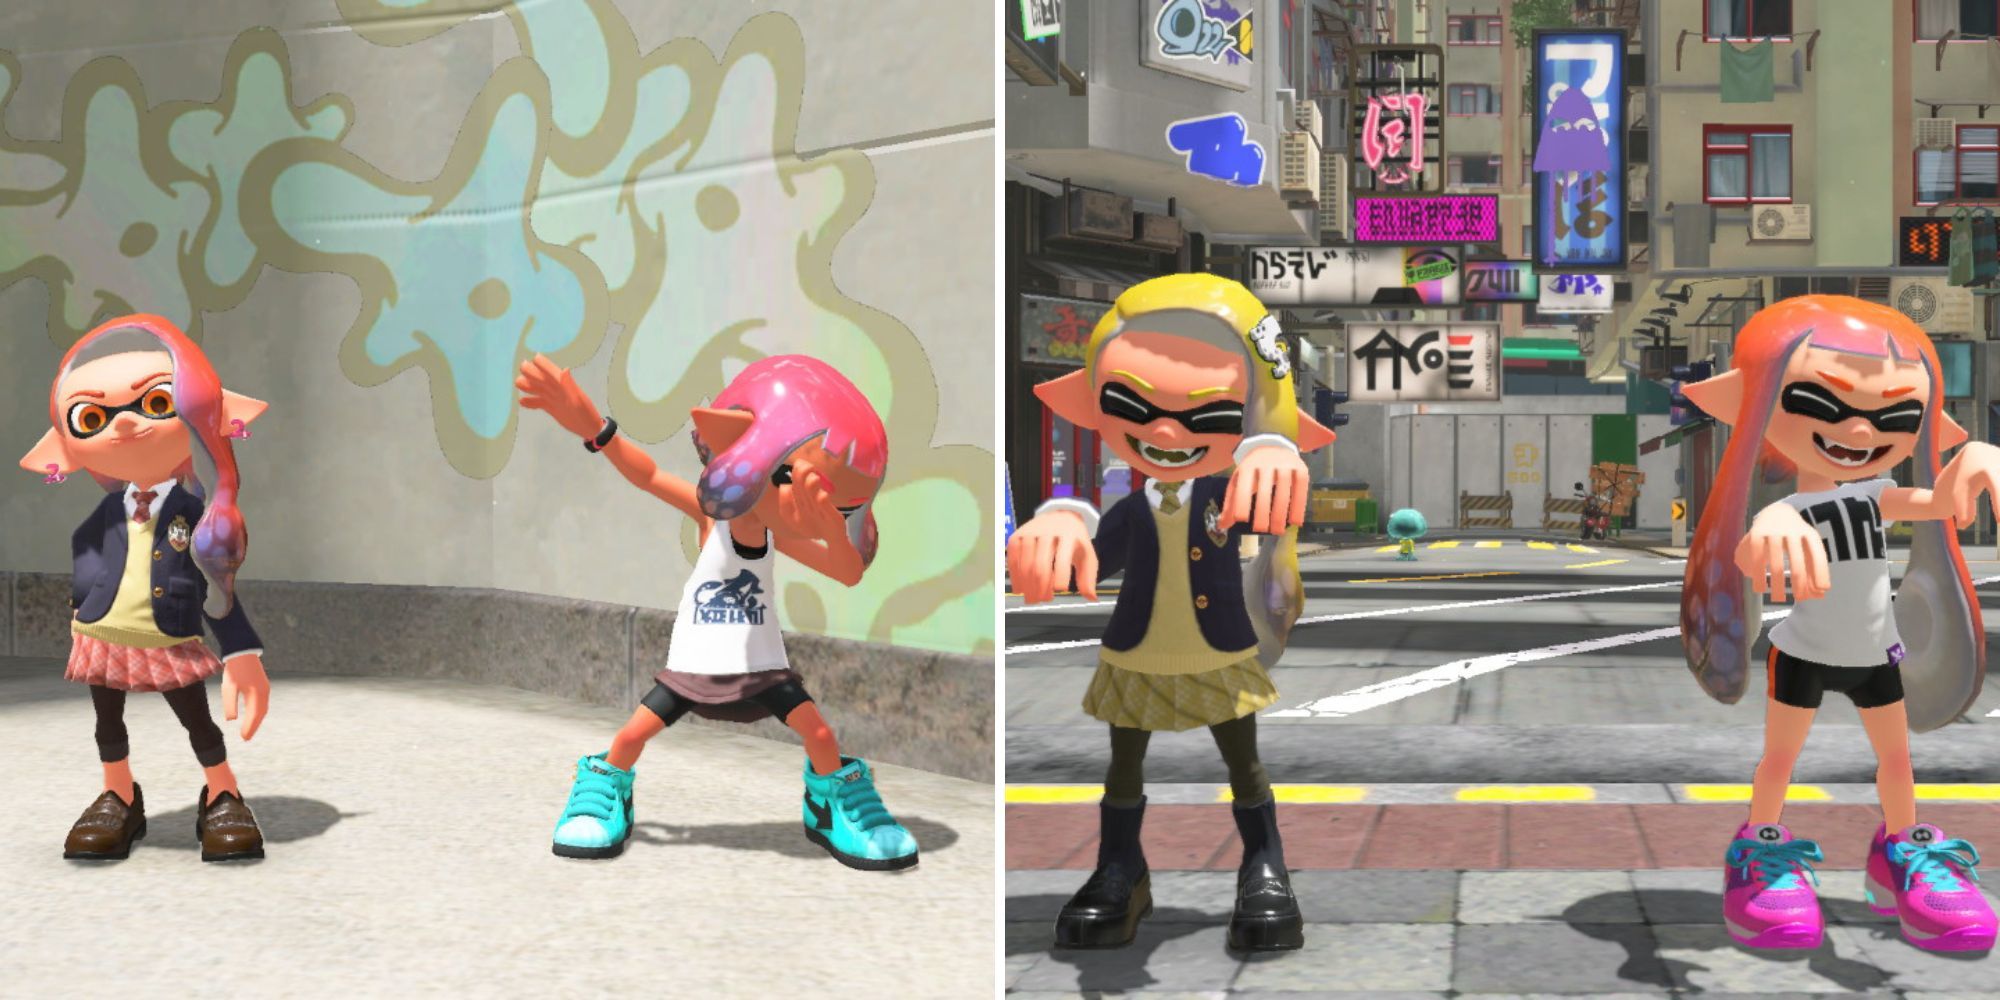 An Inkling wearing the School Cardigan poses beside a dabbing Inkling and two Inklings hold their hands in the air